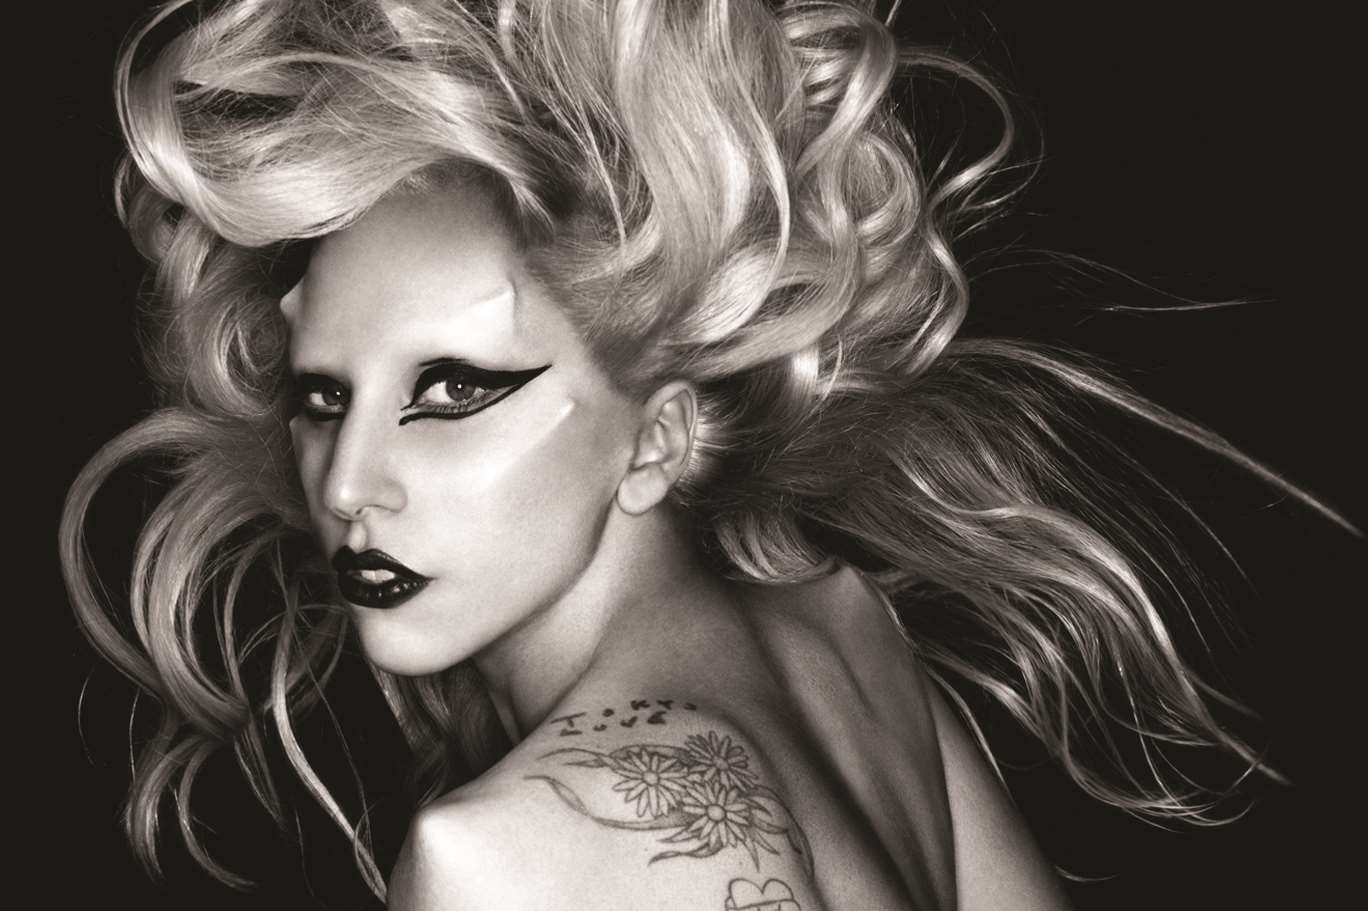 You could win tickets to see Lady Gaga with kmfm's Biggest concerts